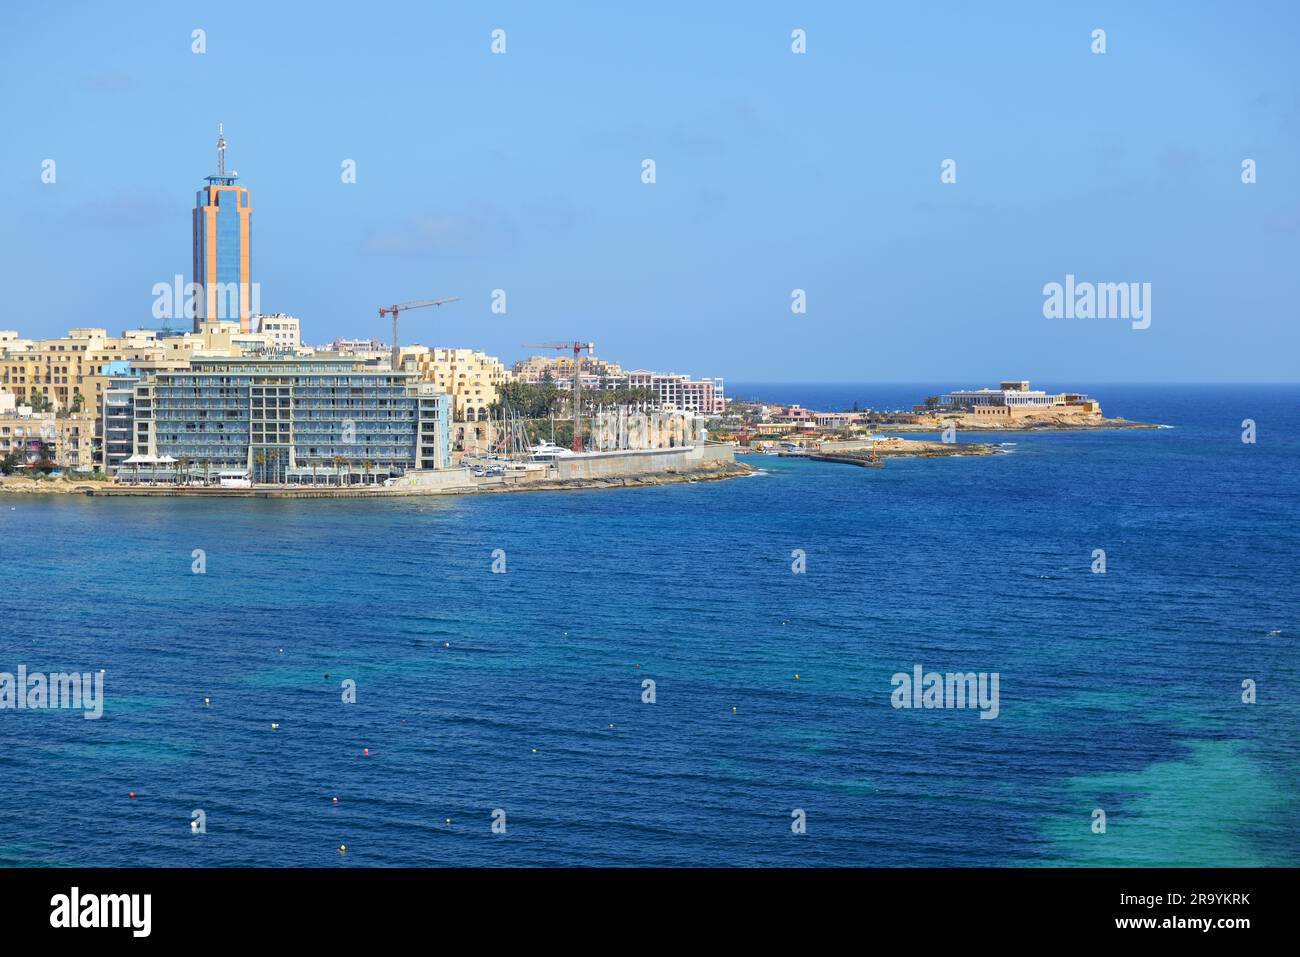 SLIEMA, MALTA - APRIL 21: The view on hotels and beach on April 21, 2015 in Sliema, Malta. More then 1,6 mln tourists is expected to visit Malta in ye Stock Photo